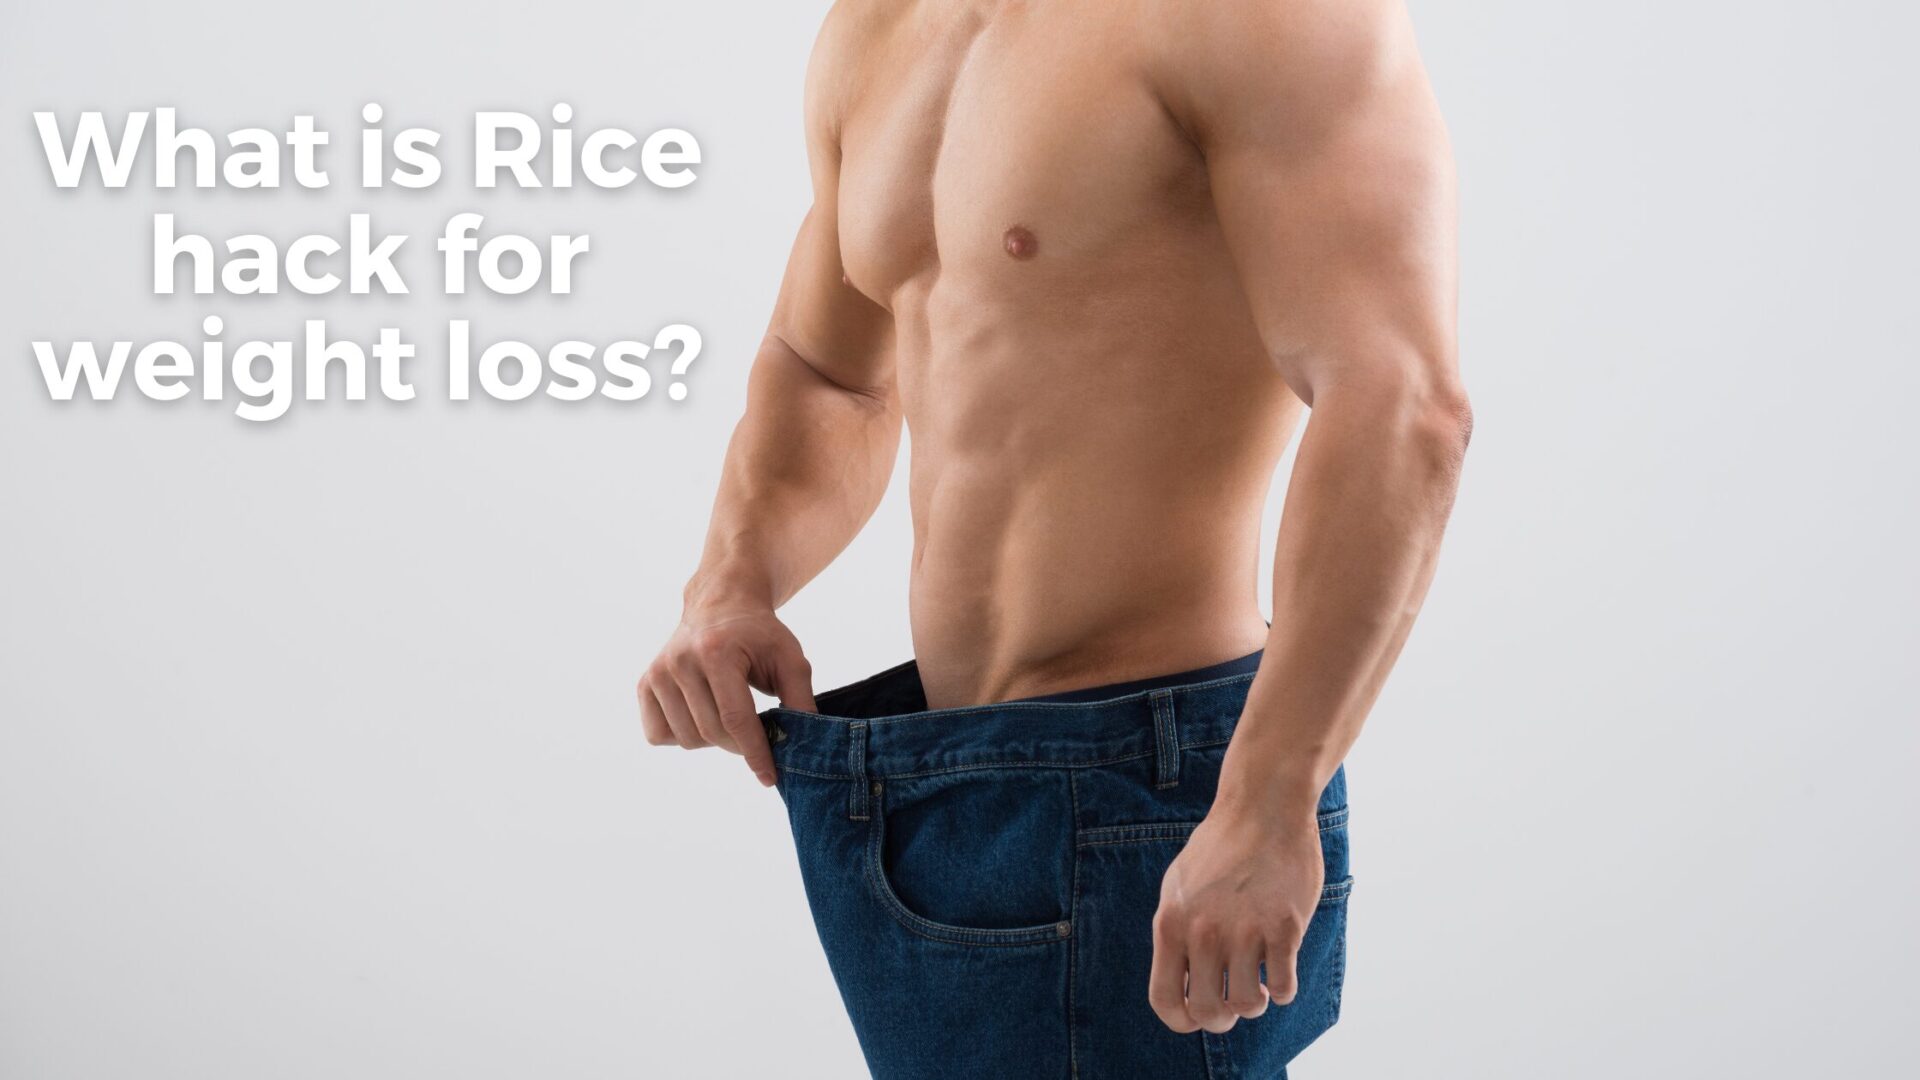 What is the rice hack?